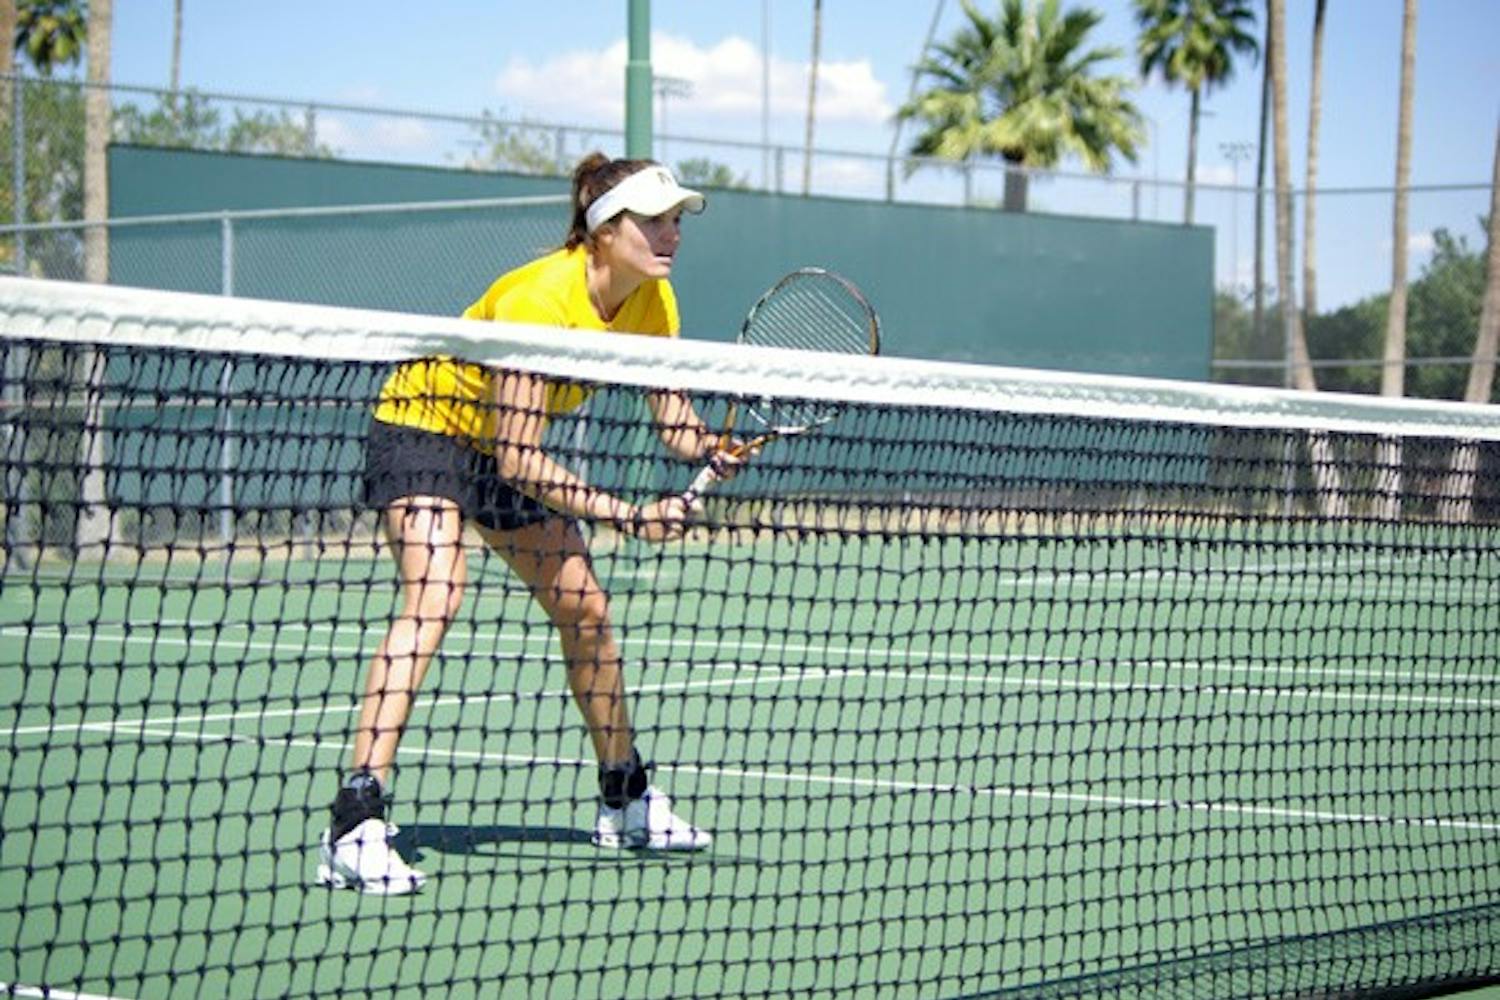 In the groove: ASU senior Ashlee Brown waits for the serve during doubles play against UC Irvine on Tuesday afternoon. The Sun Devils swept the Anteaters 7-0 for their third straight victory. (Photo by Nathan Meacham)